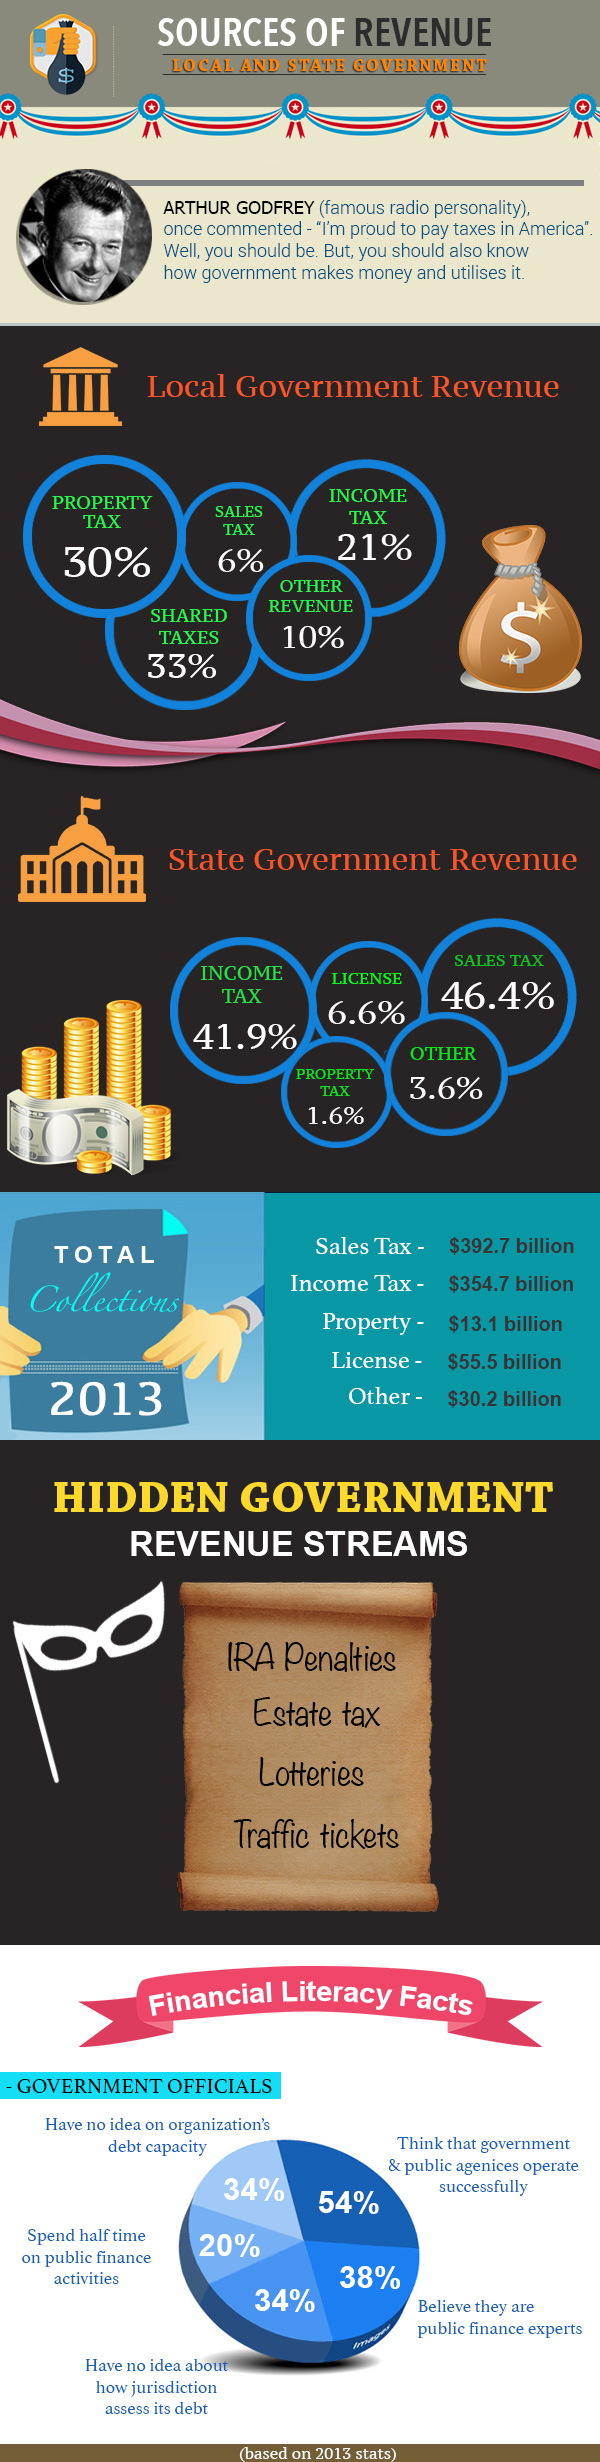 Hidden facts about sources of revenues - Local and state government 